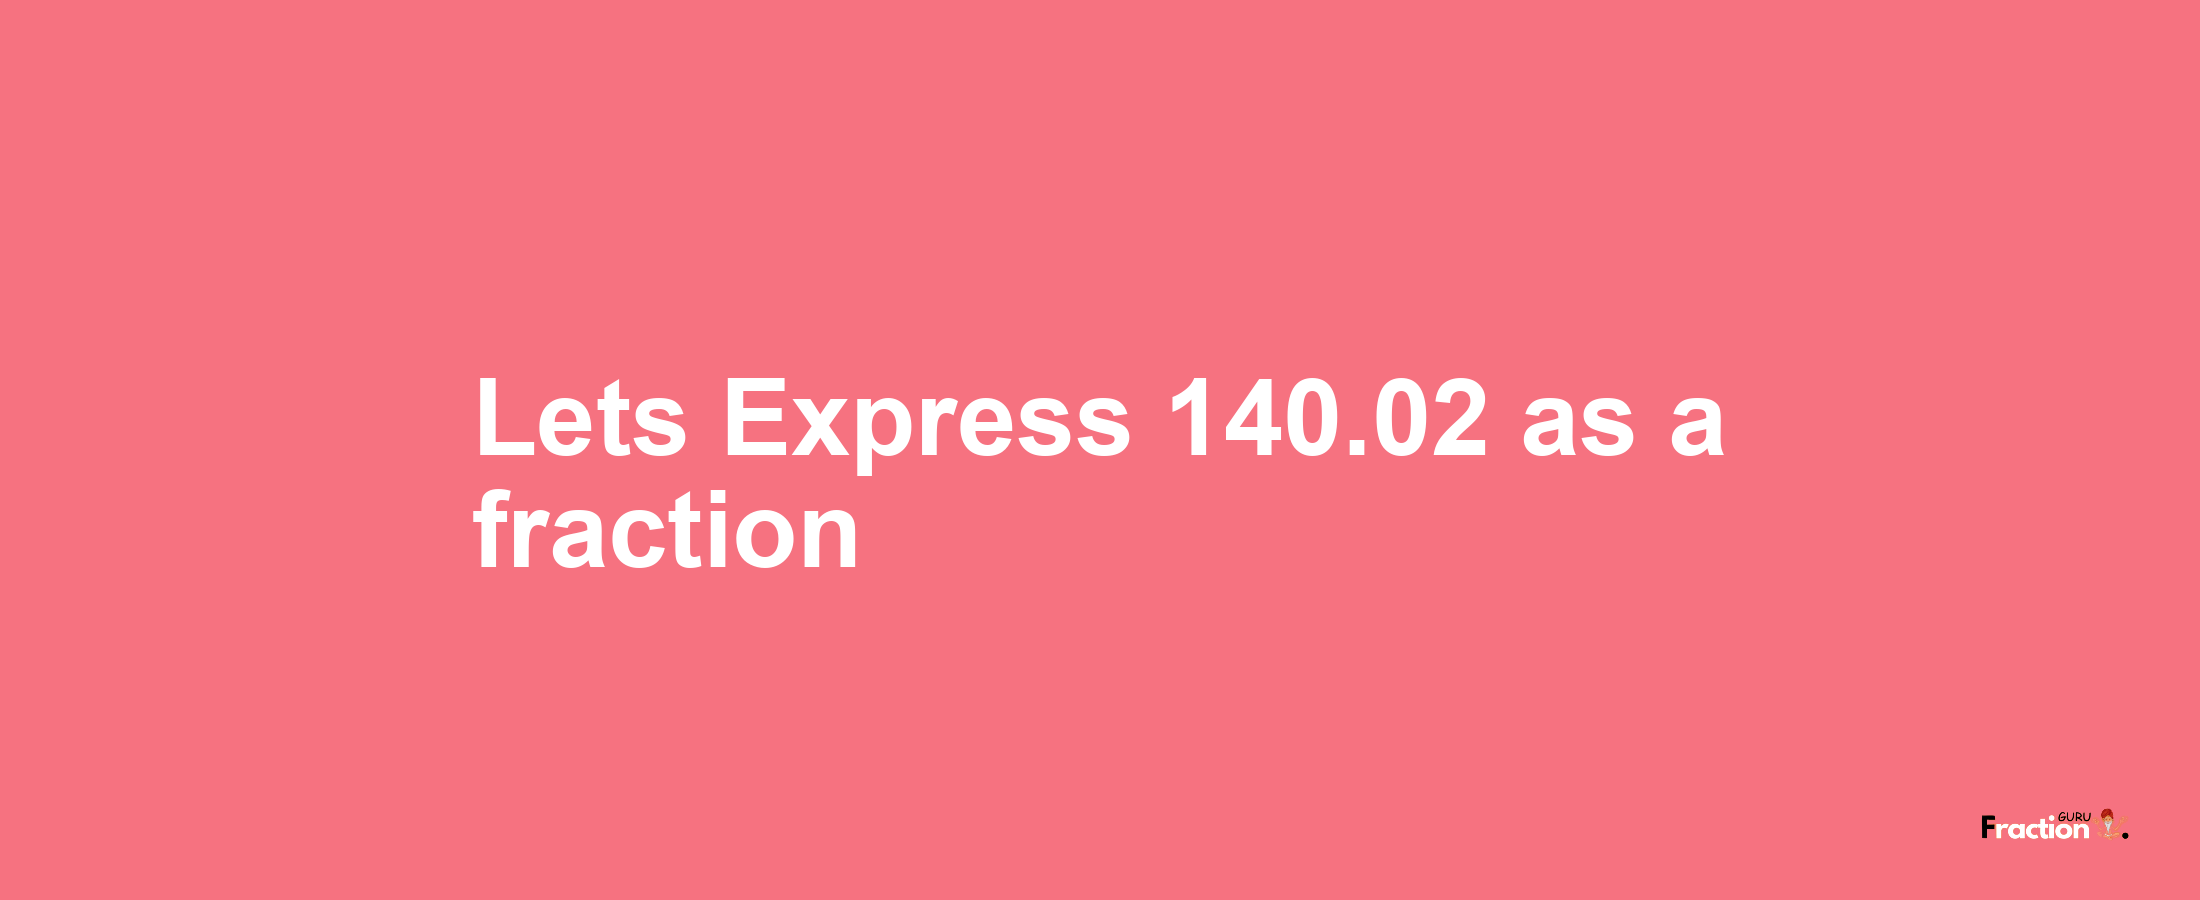 Lets Express 140.02 as afraction